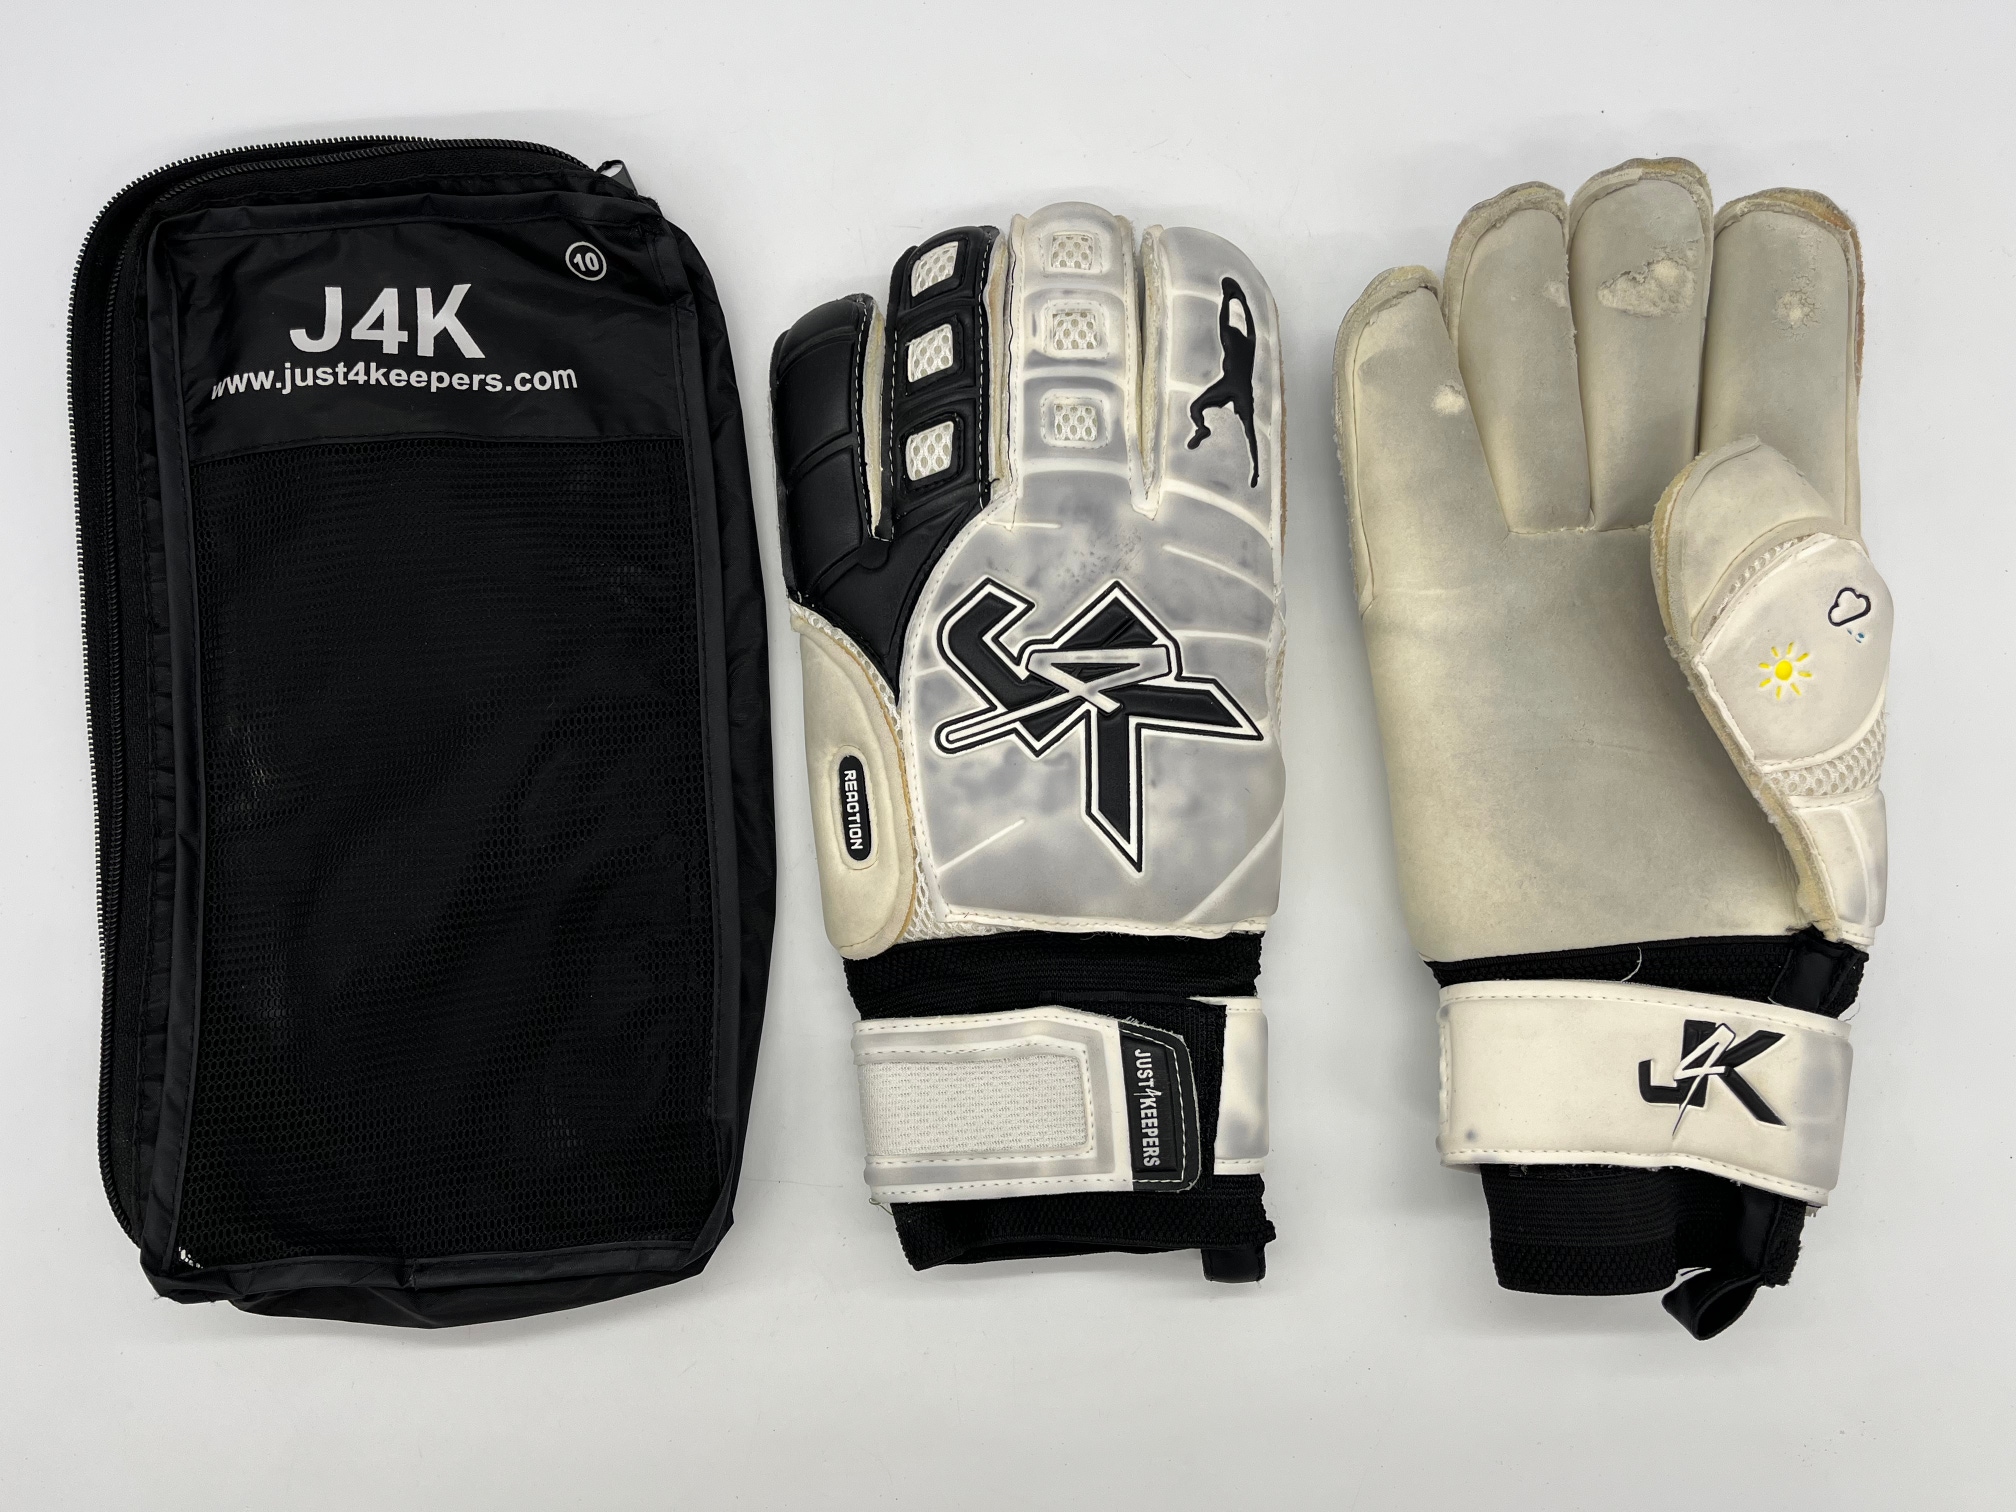 Size 10 Gloves Reaction Keeper Goalie Soccer Goal Keep J4K Just4Keepers Just 4 Keepers White Case